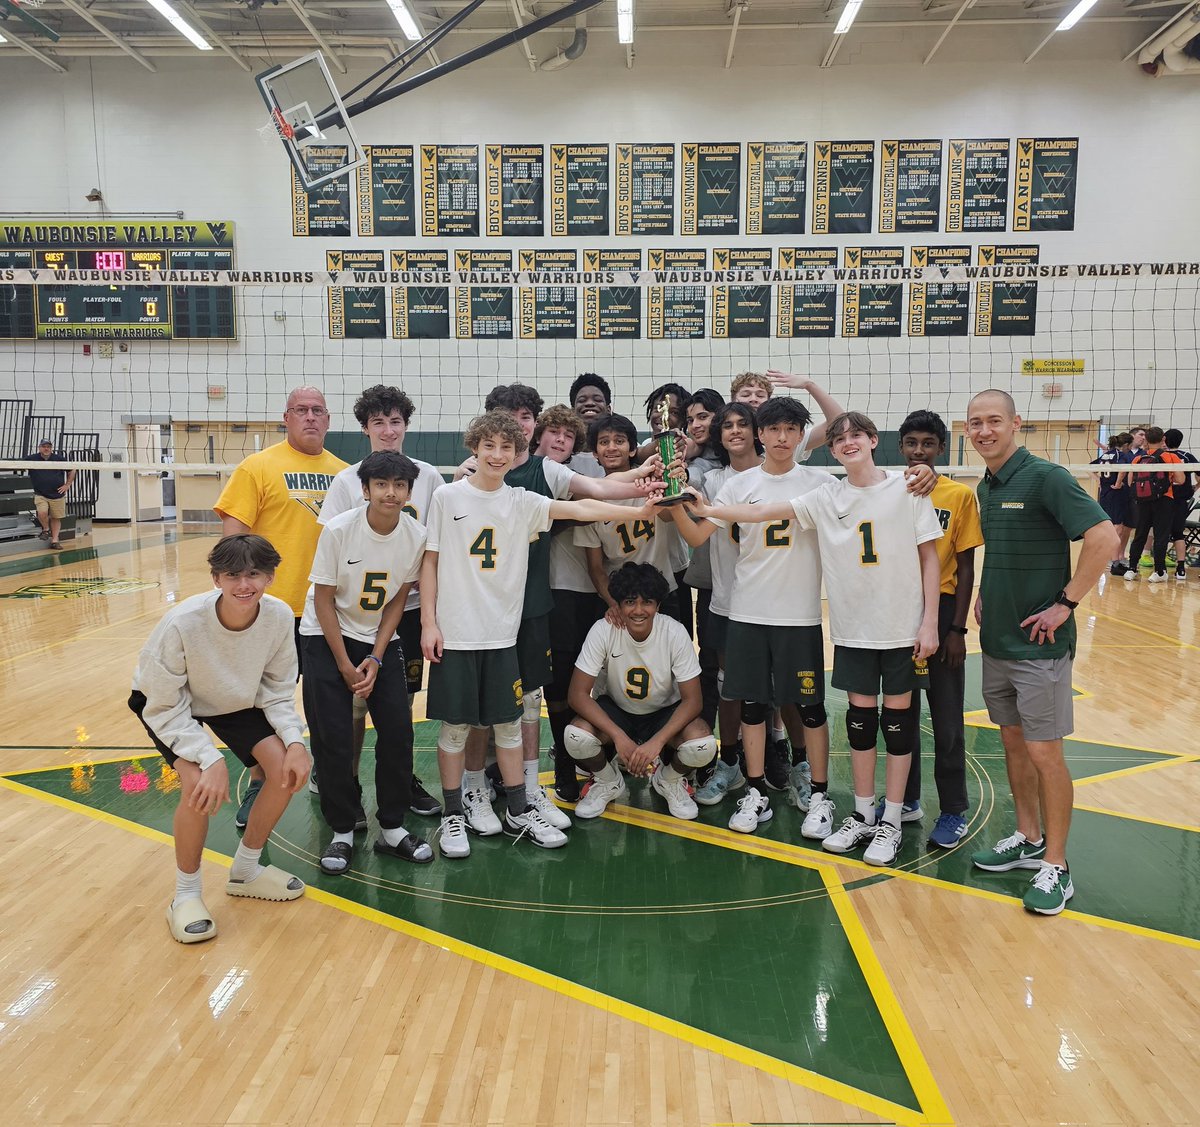 Congratulations to our Freshmen team for going undefeated, not dropping a set in the Warrior Invite and taking the Championship! #createdbytheculture #thefuture #bewv